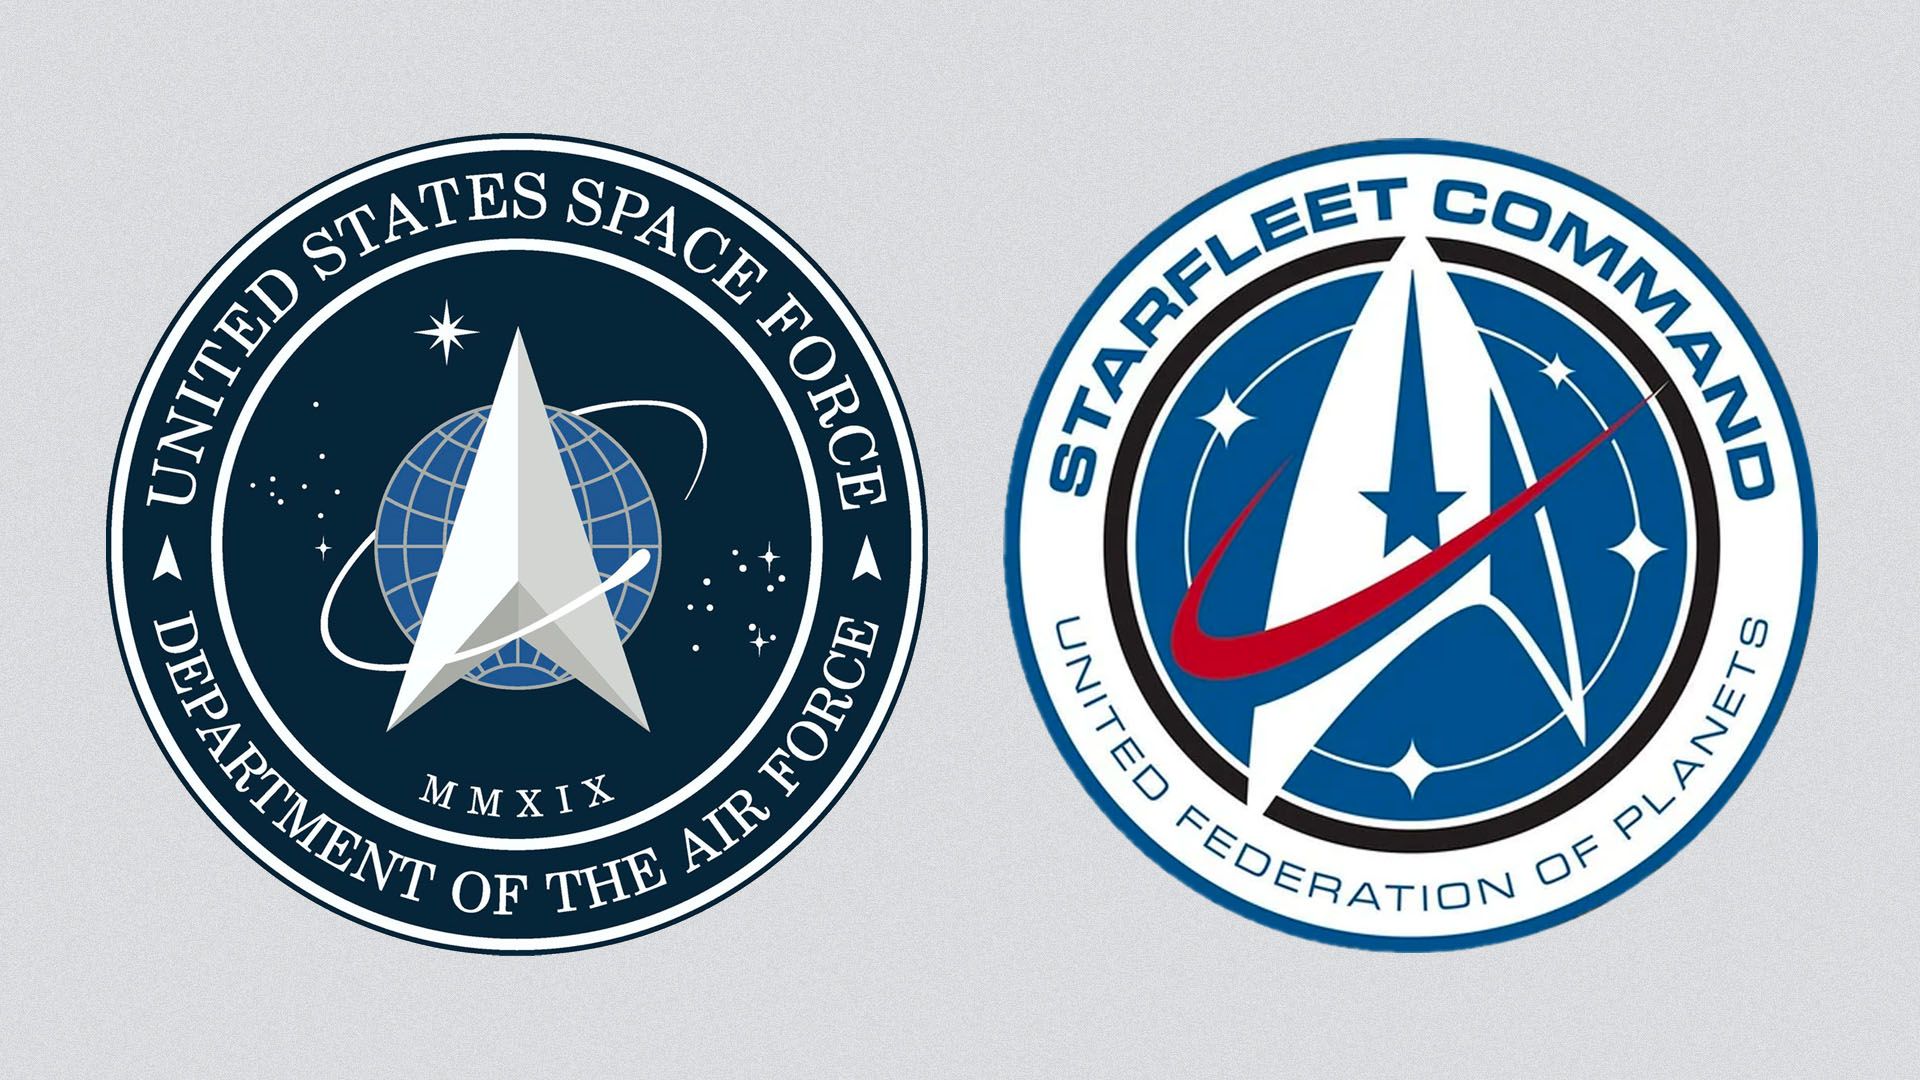 The Starfleet and Space Force logos side by side against a gray background.